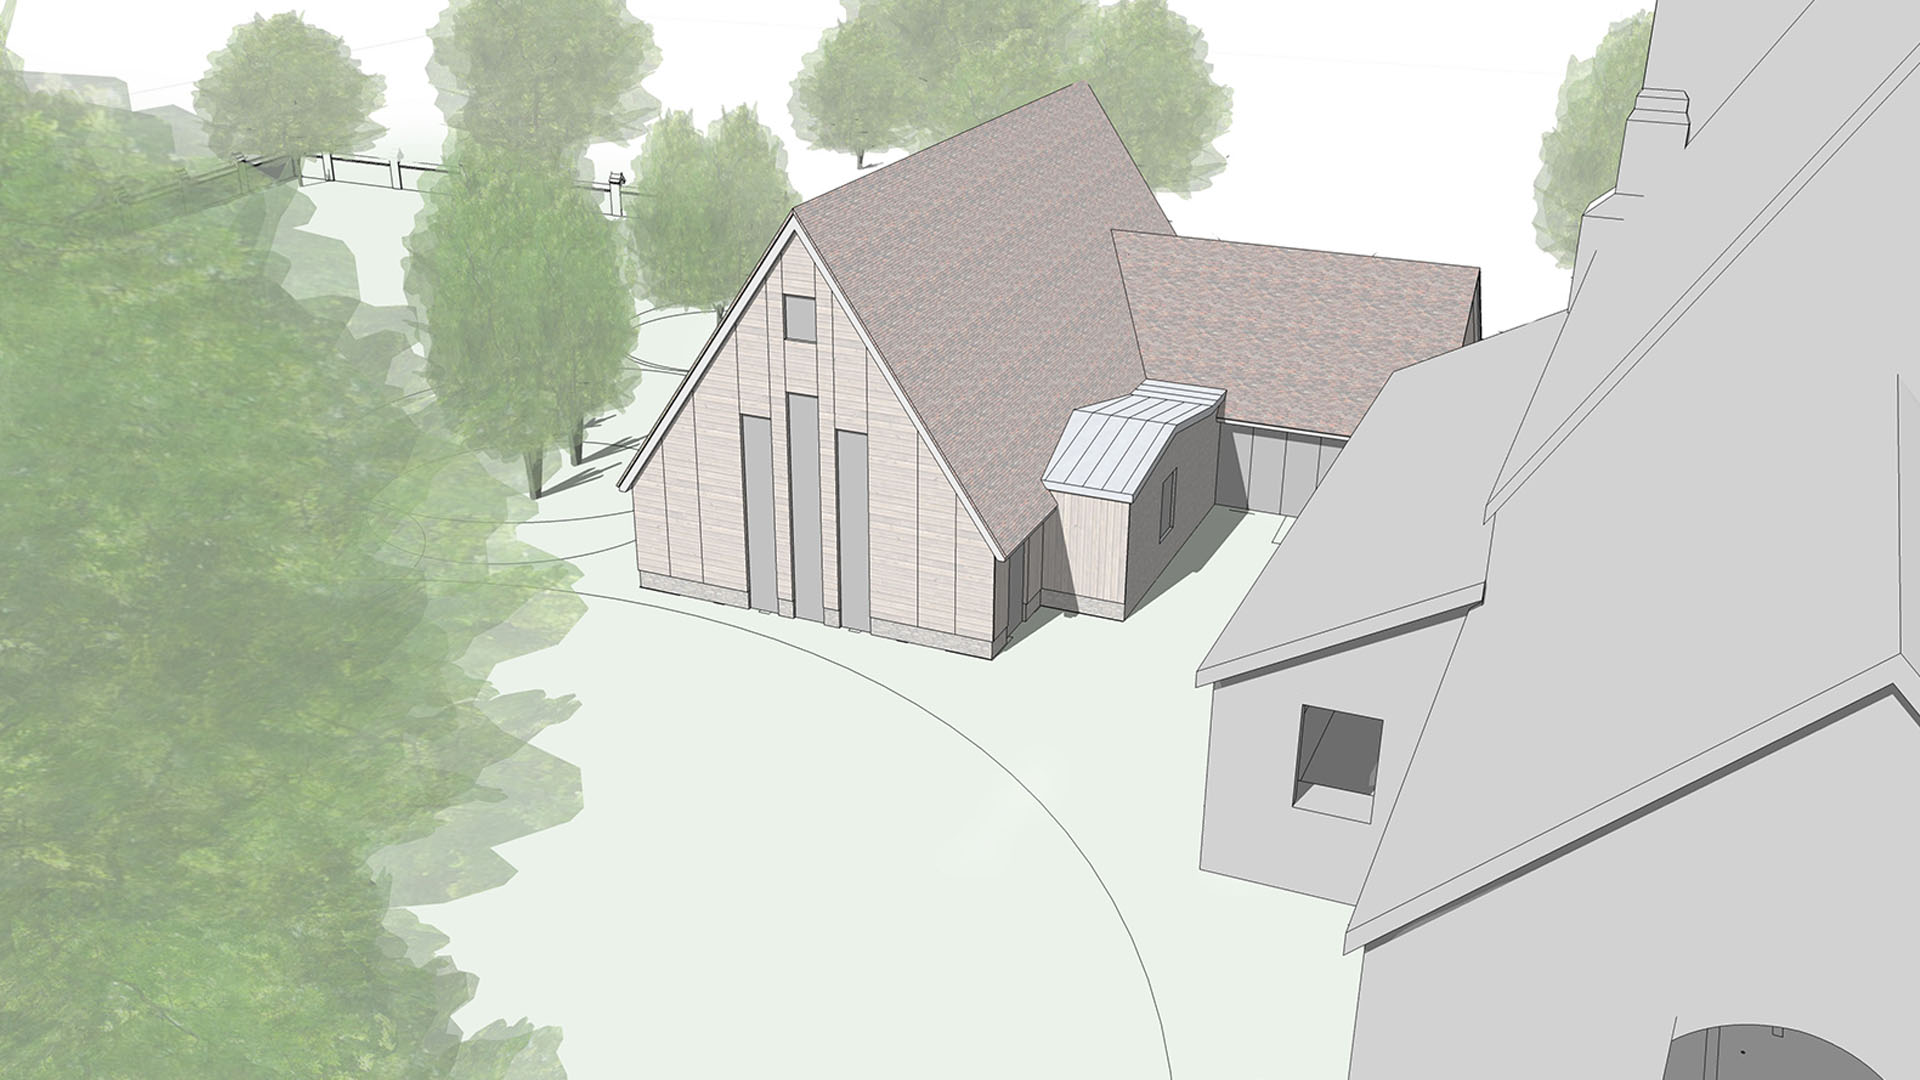 Sketch of proposed annex at St Margaret, Ifield